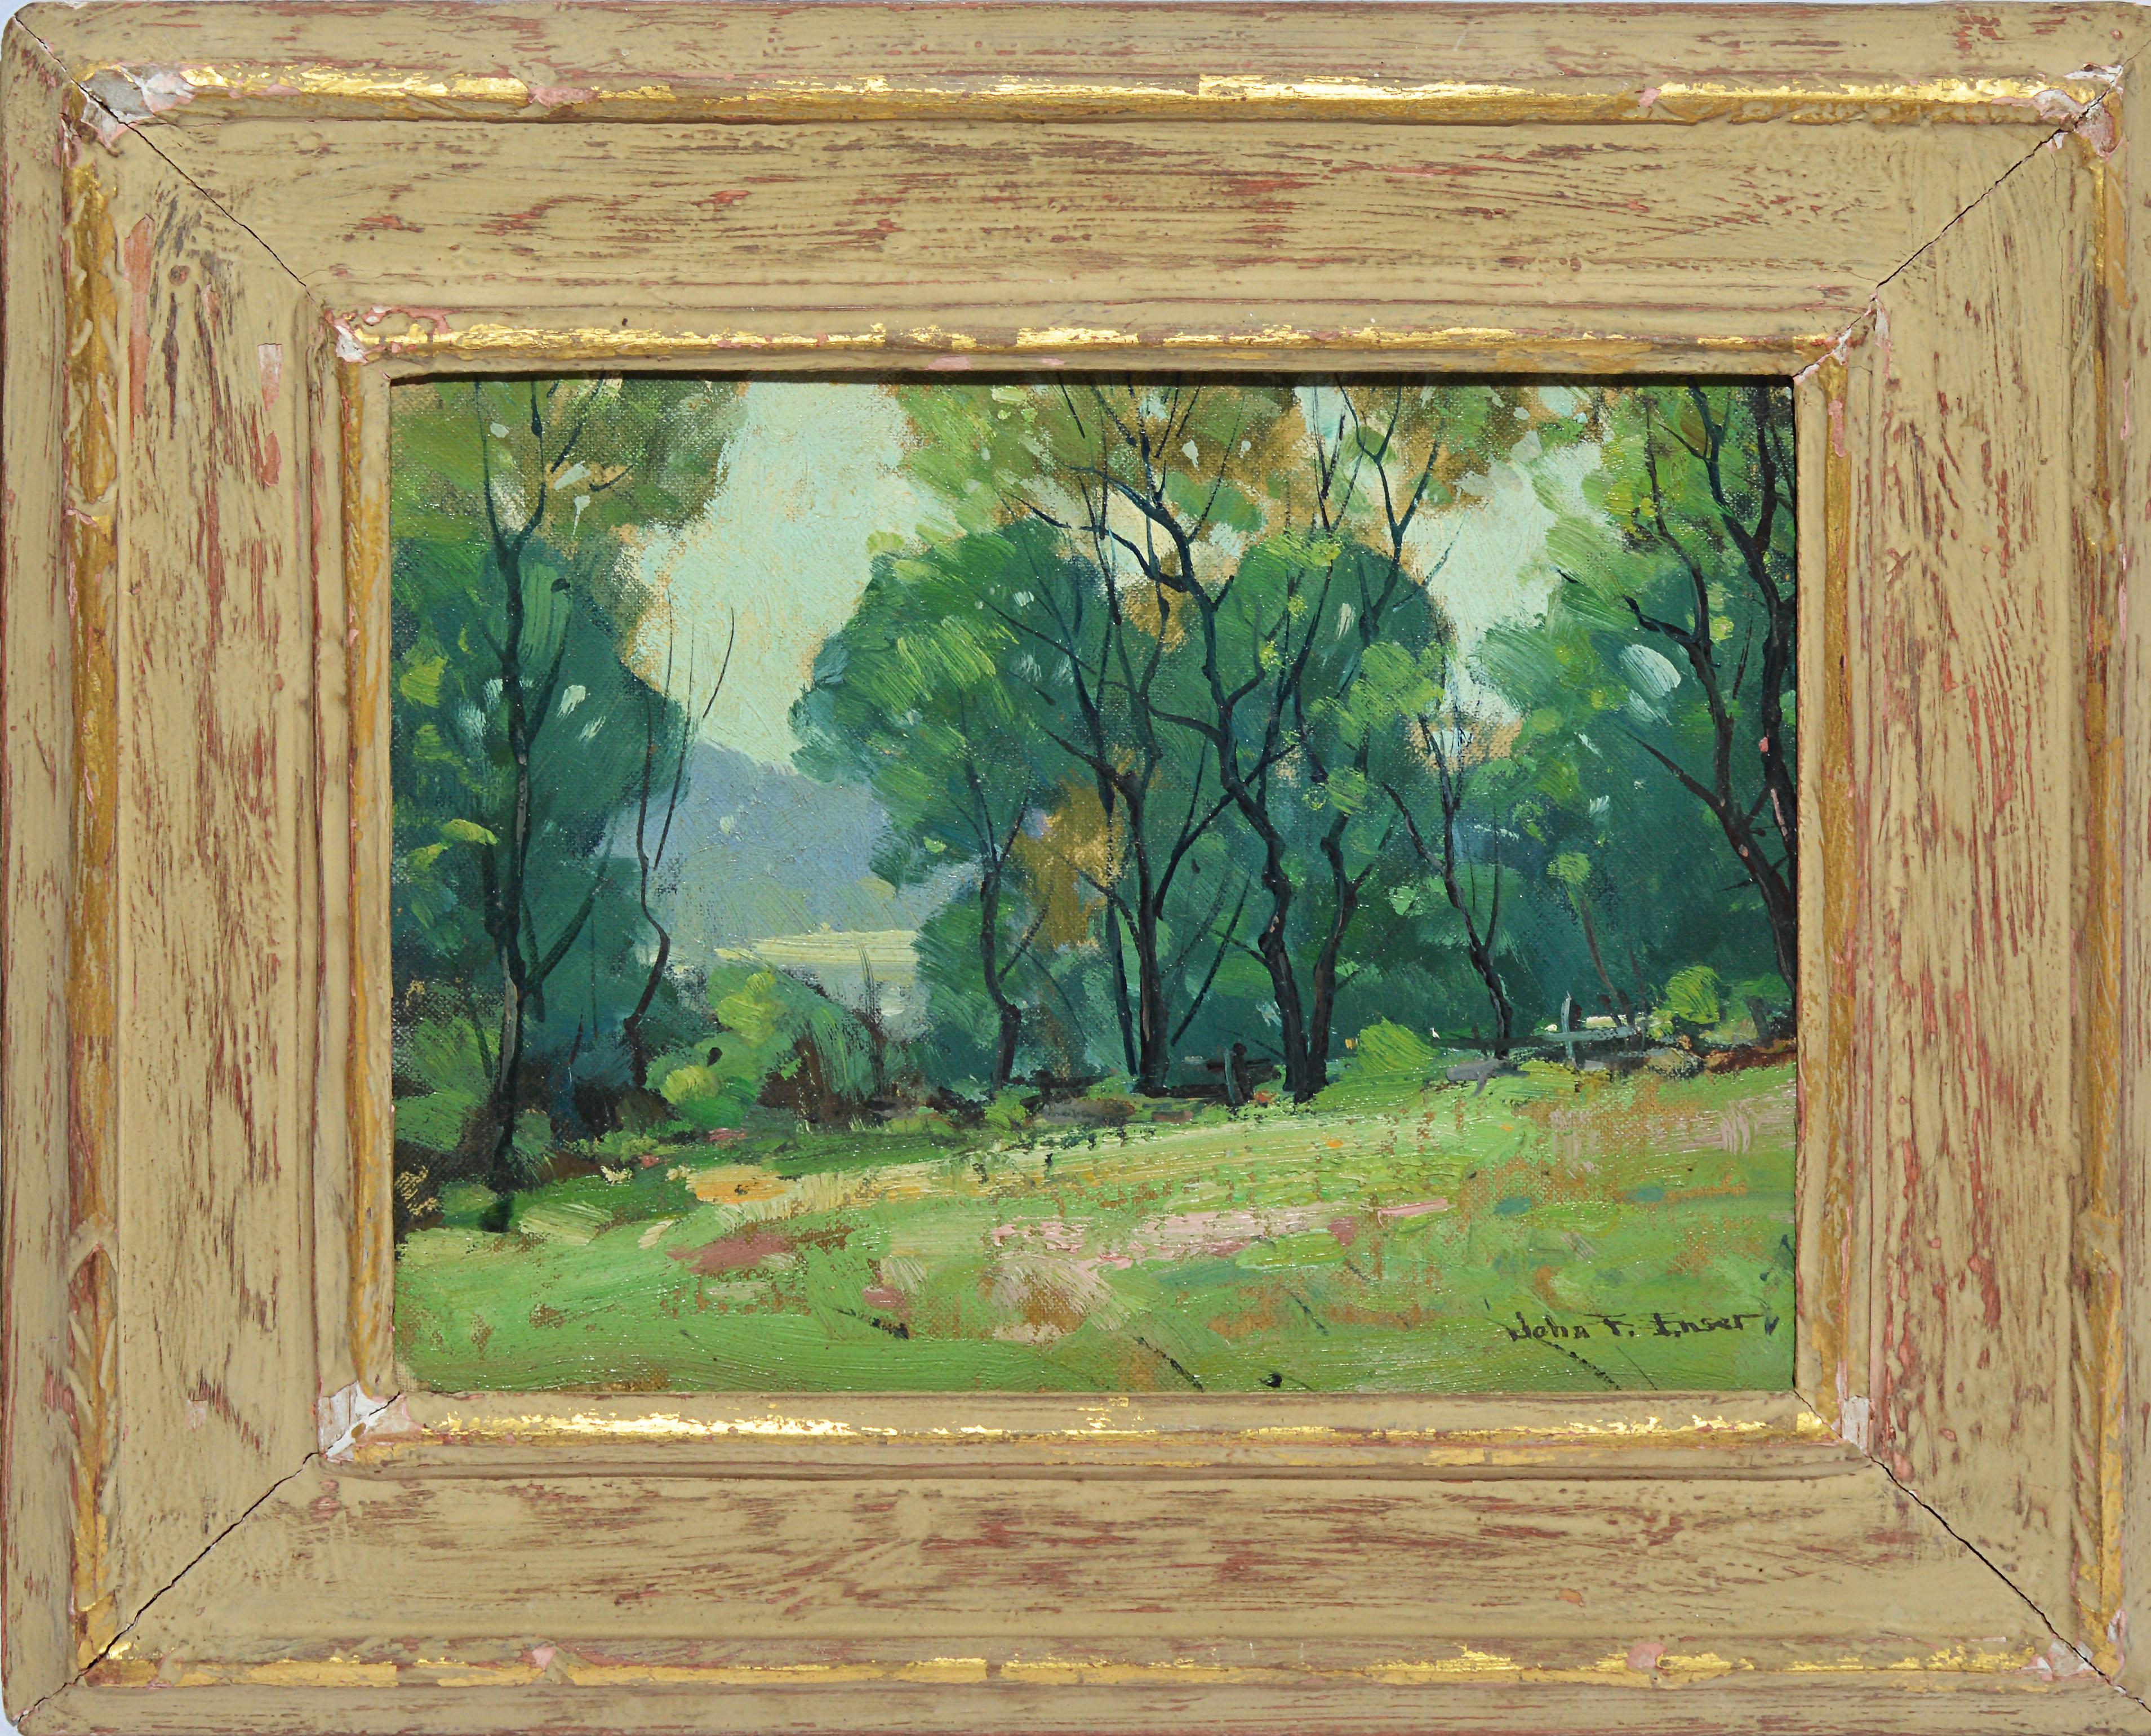 Antique impressionist landscape oil painting by John Enser  (1898 - 1968). Oil on board, circa 1920.  Signed.  Displayed in a period arts and crafts frame.  Image, 10"L x 8"H, overall 16"L x 14"H.